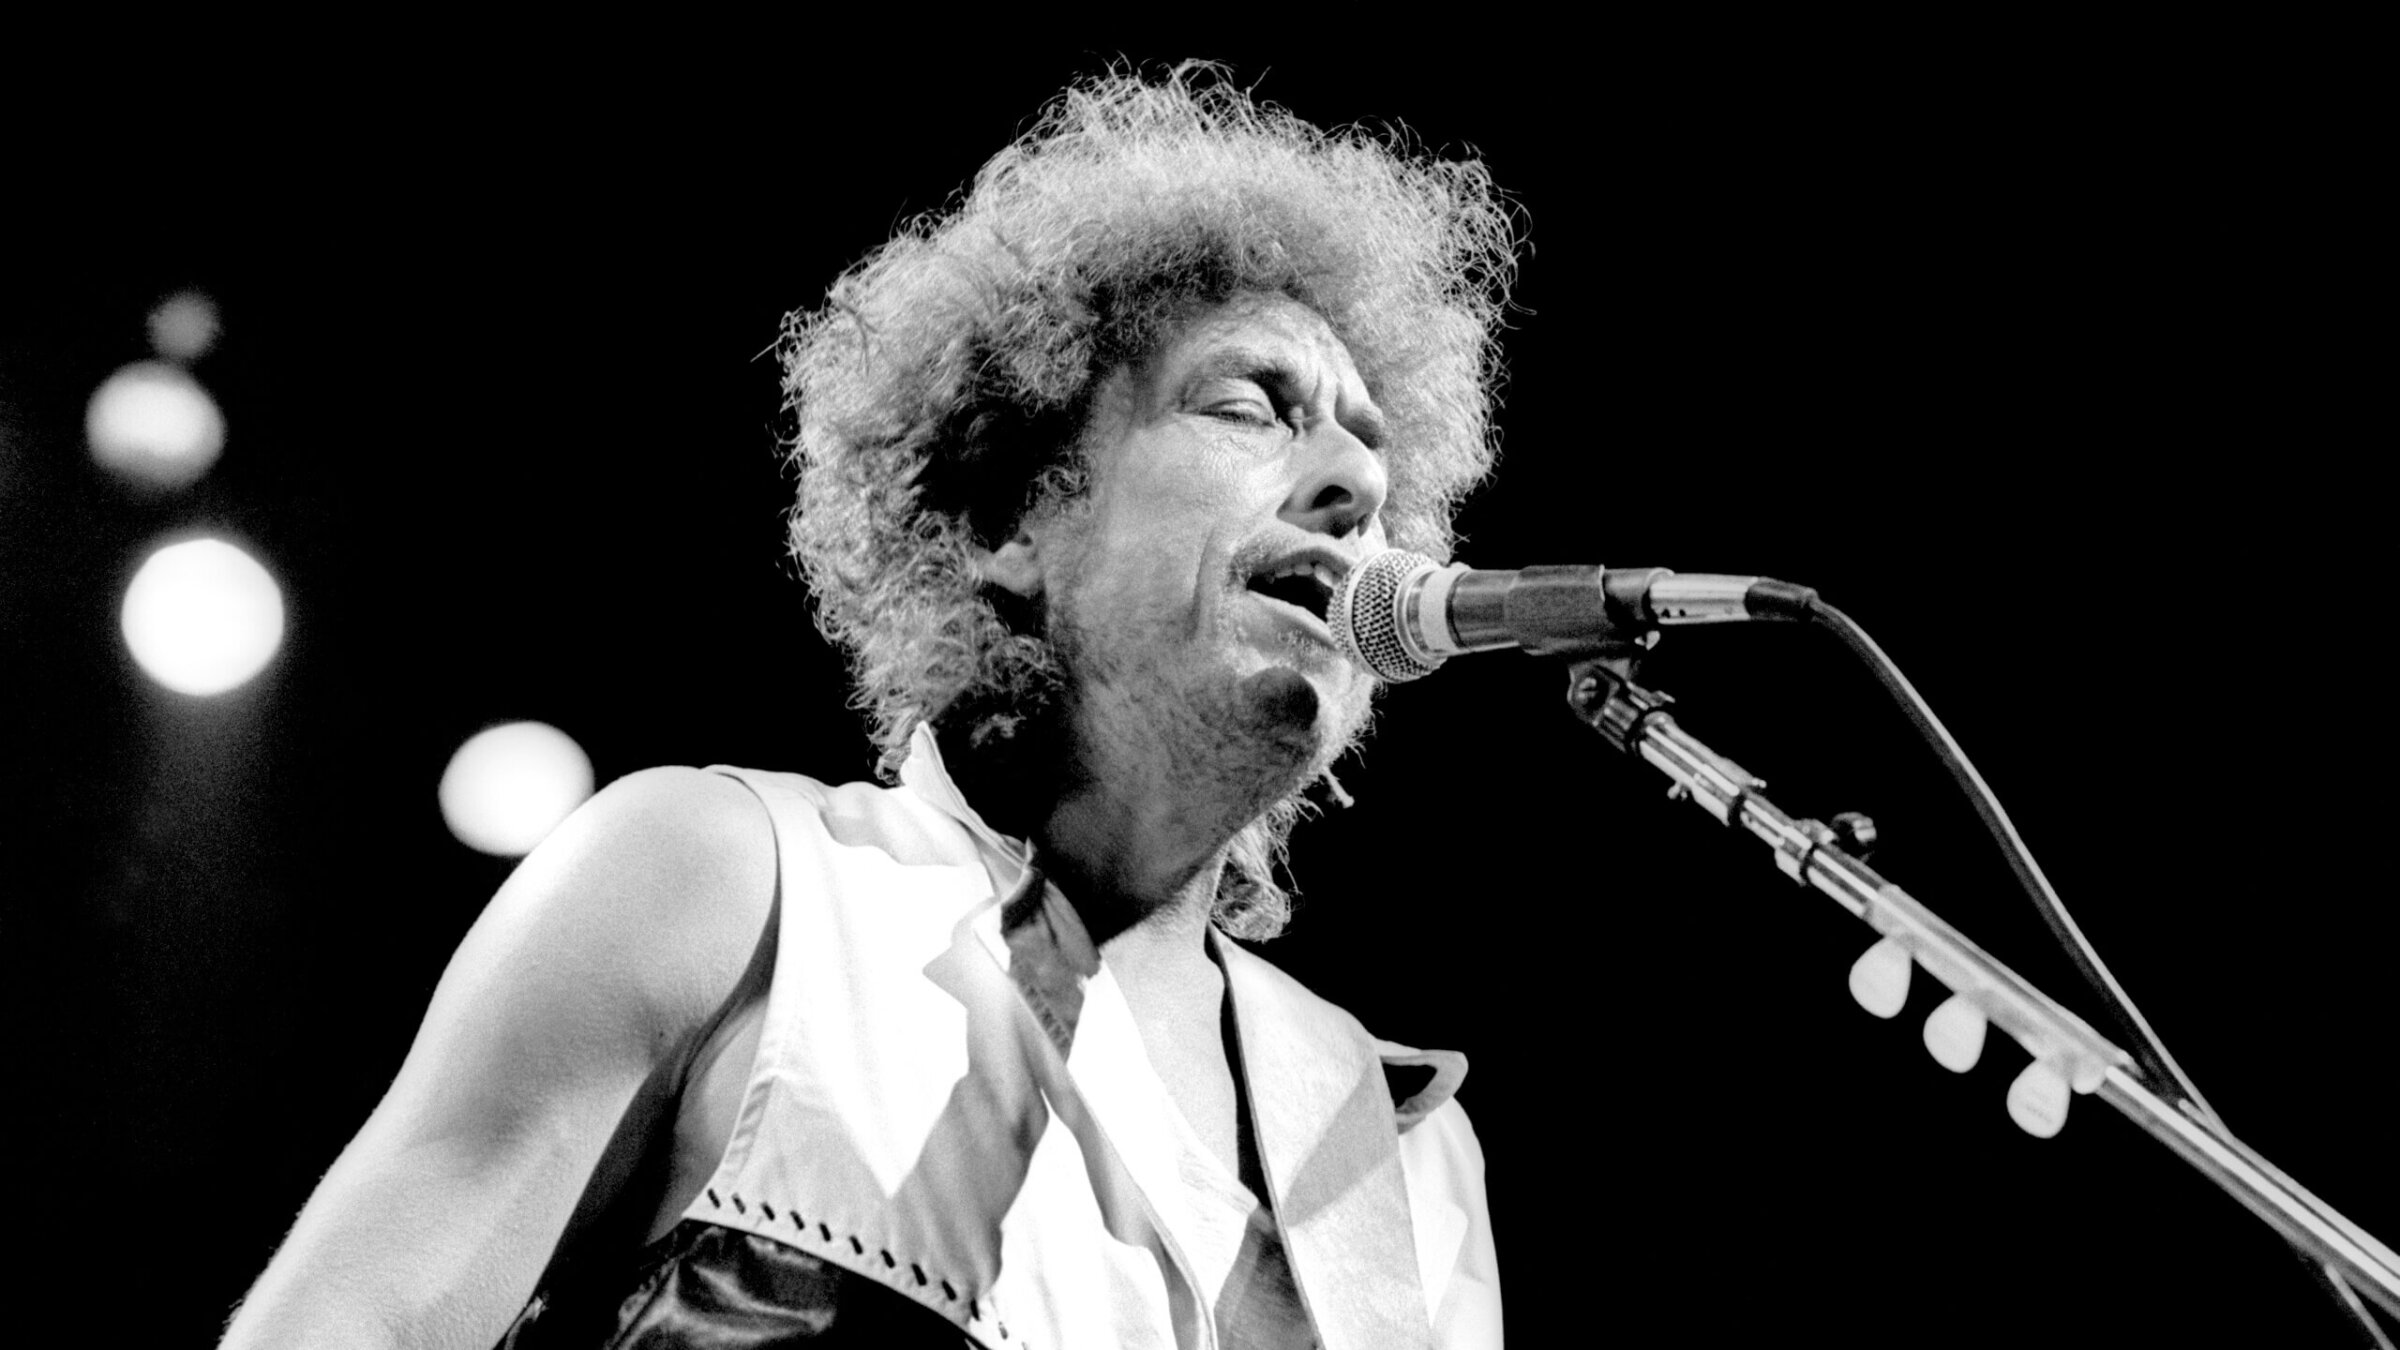 Bob Dylan performs at the "Conspiracy of Hope" concert on behalf of Amnesty International in 1986.